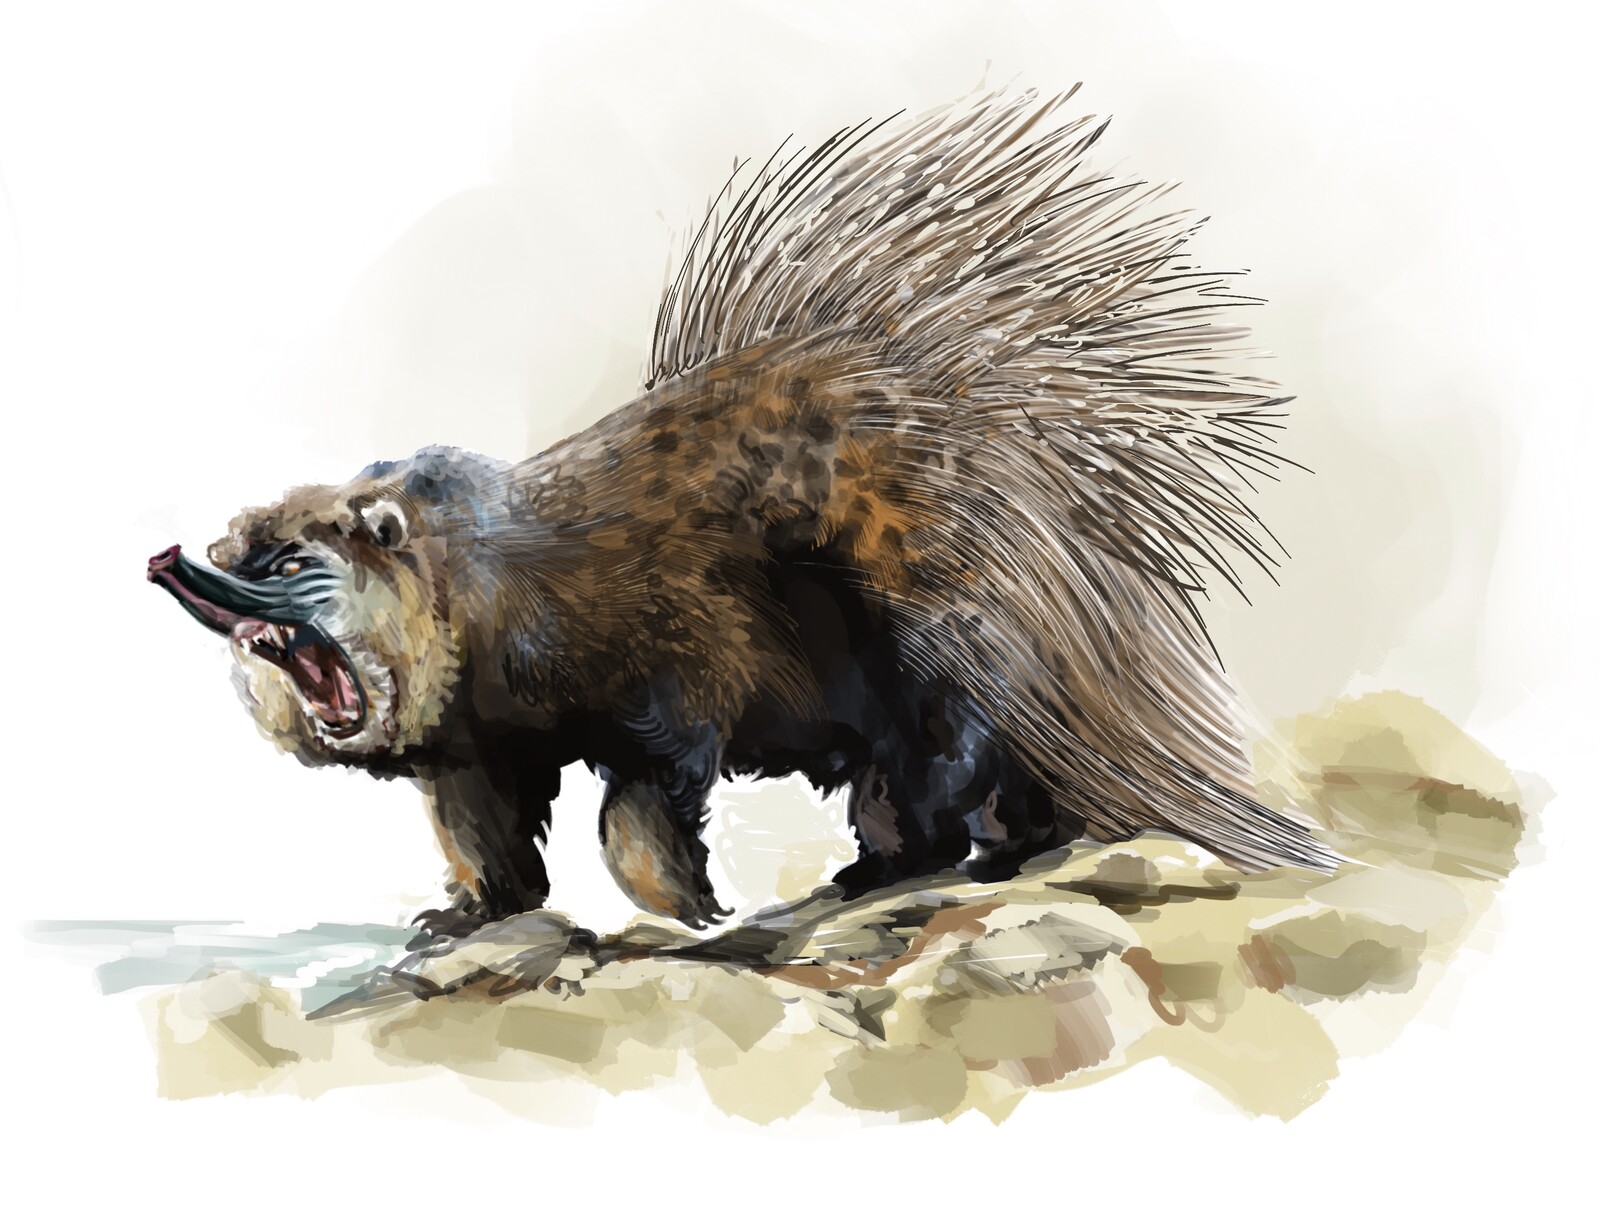 Spinemarten threat display showing its porcupine like spines, some of which (unlike a porcupine) can be fired at creatures at its rear.